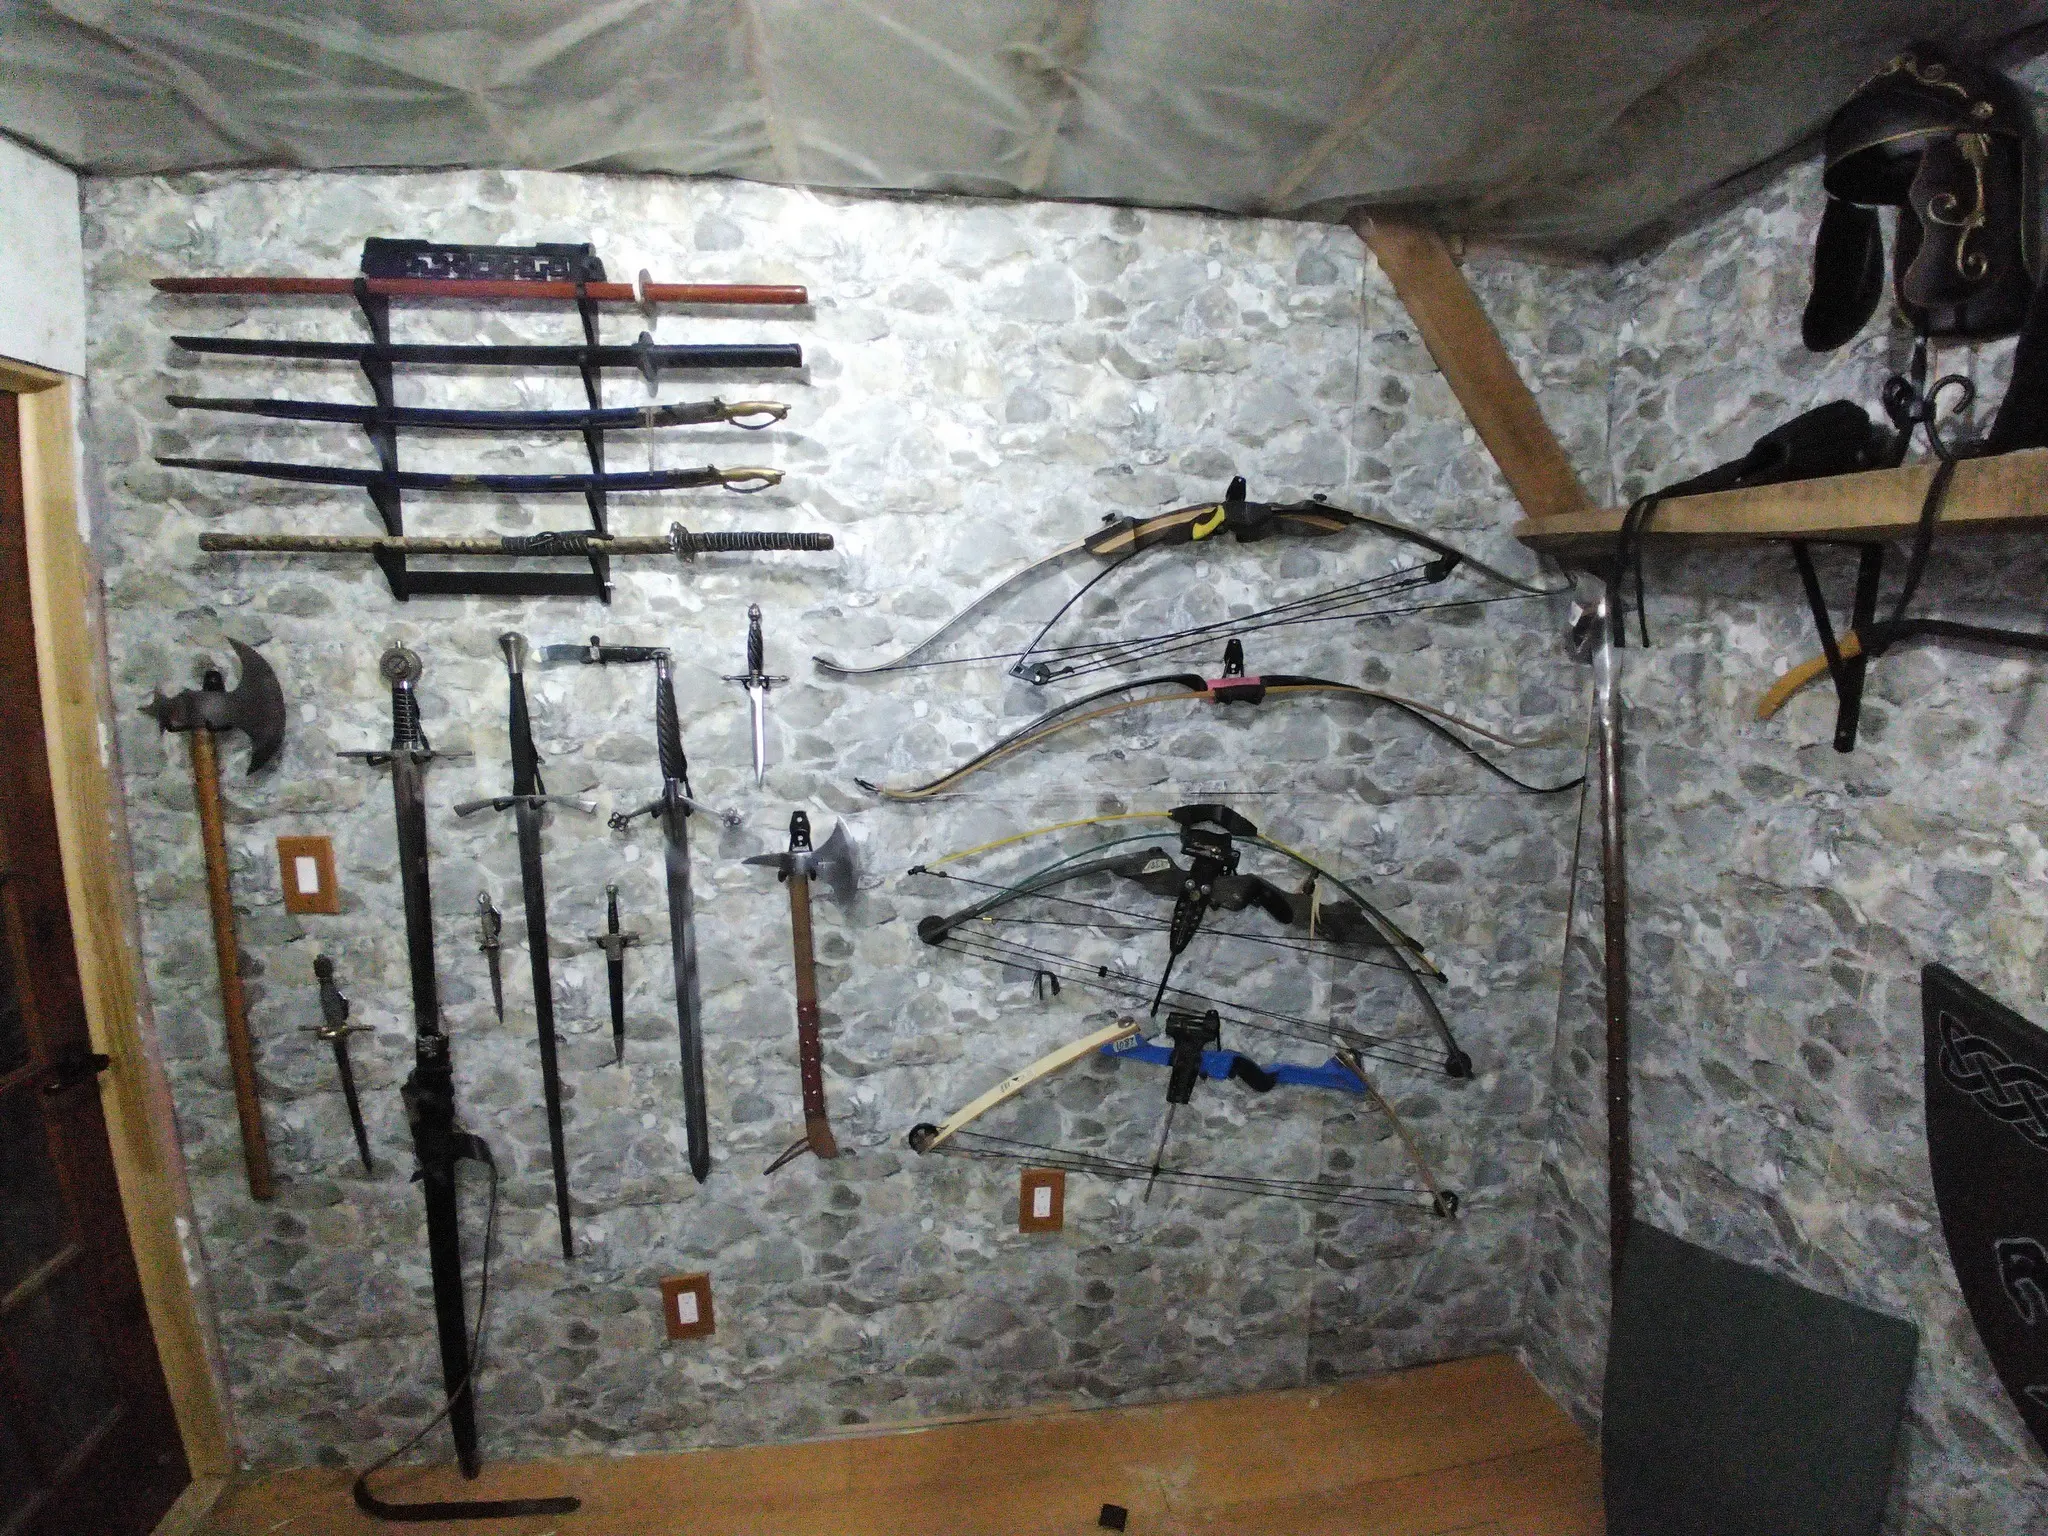 Wall of swords, axes and bows